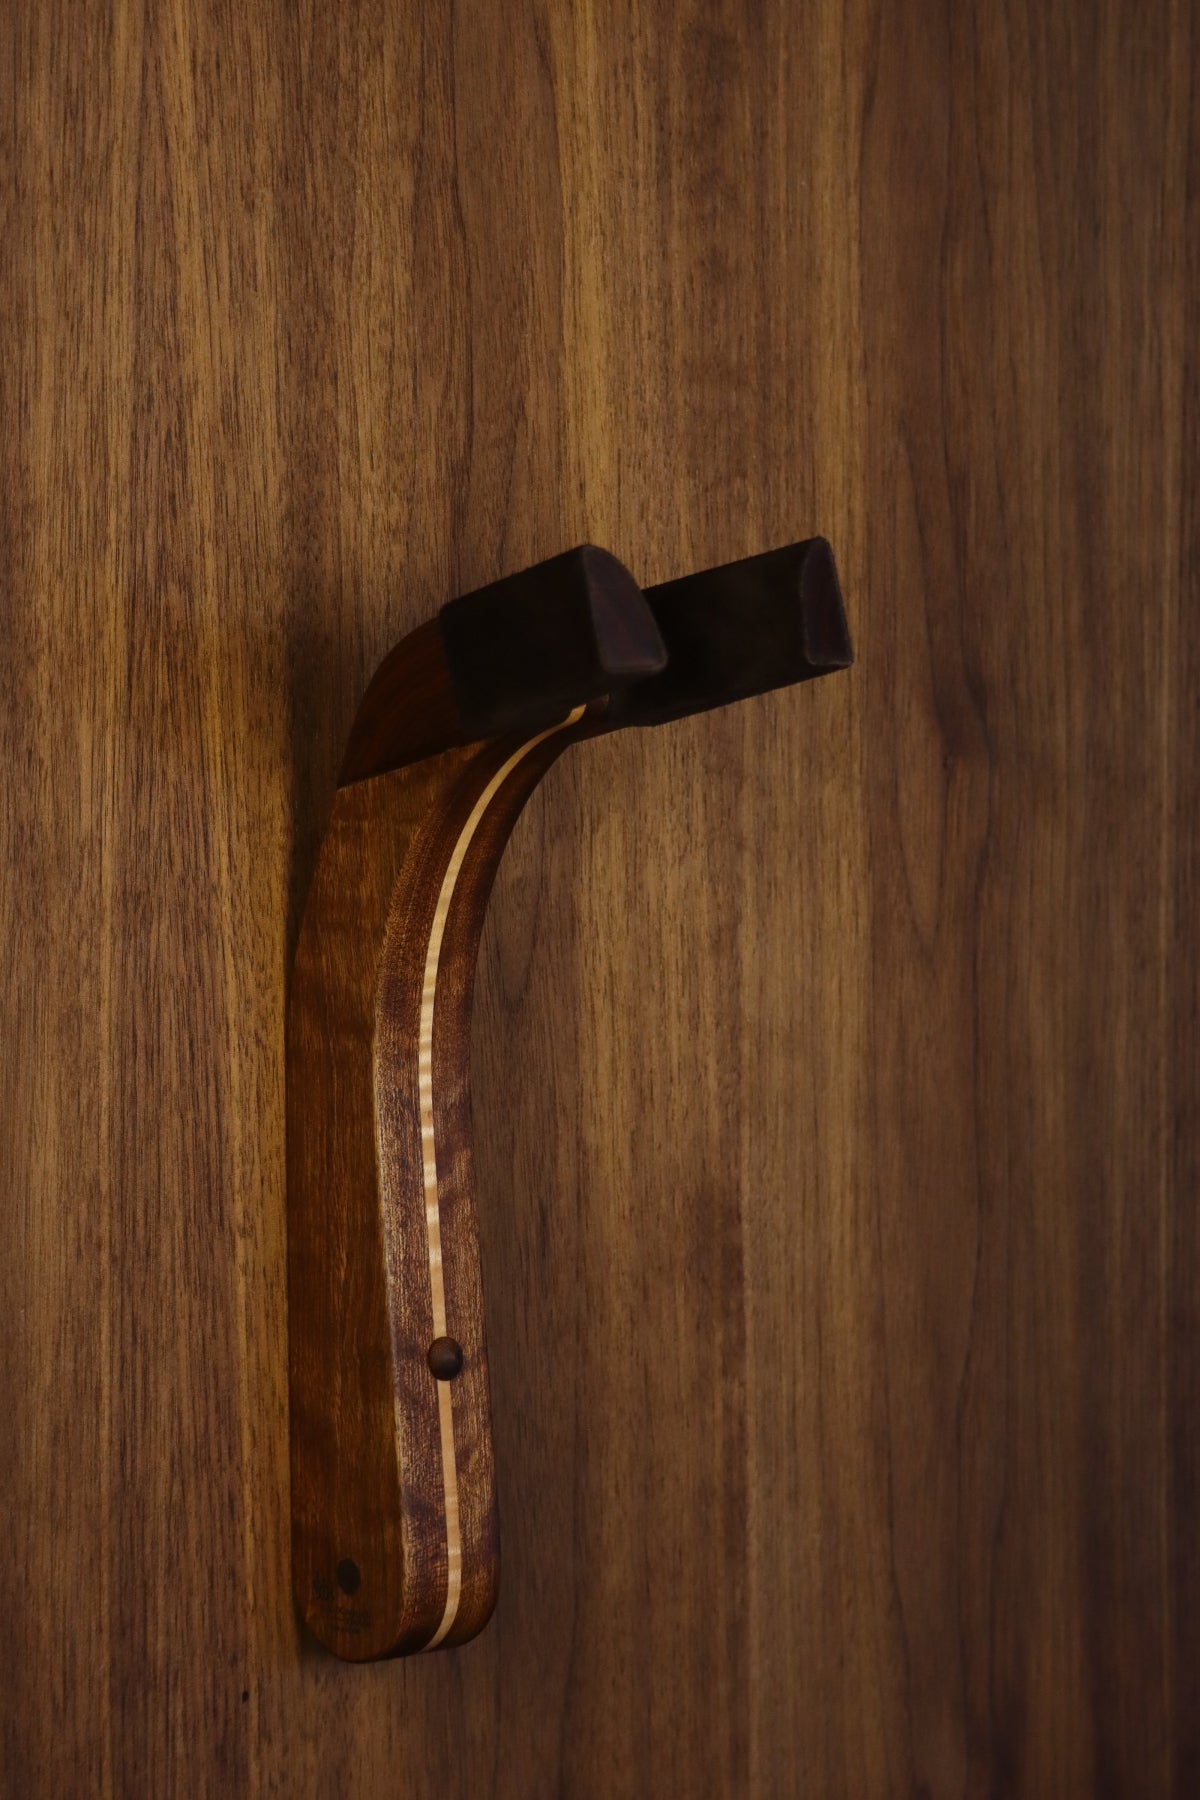 Chechen Caribbean rosewood and curly maple wood guitar wall mount hanger installed on paneled wall